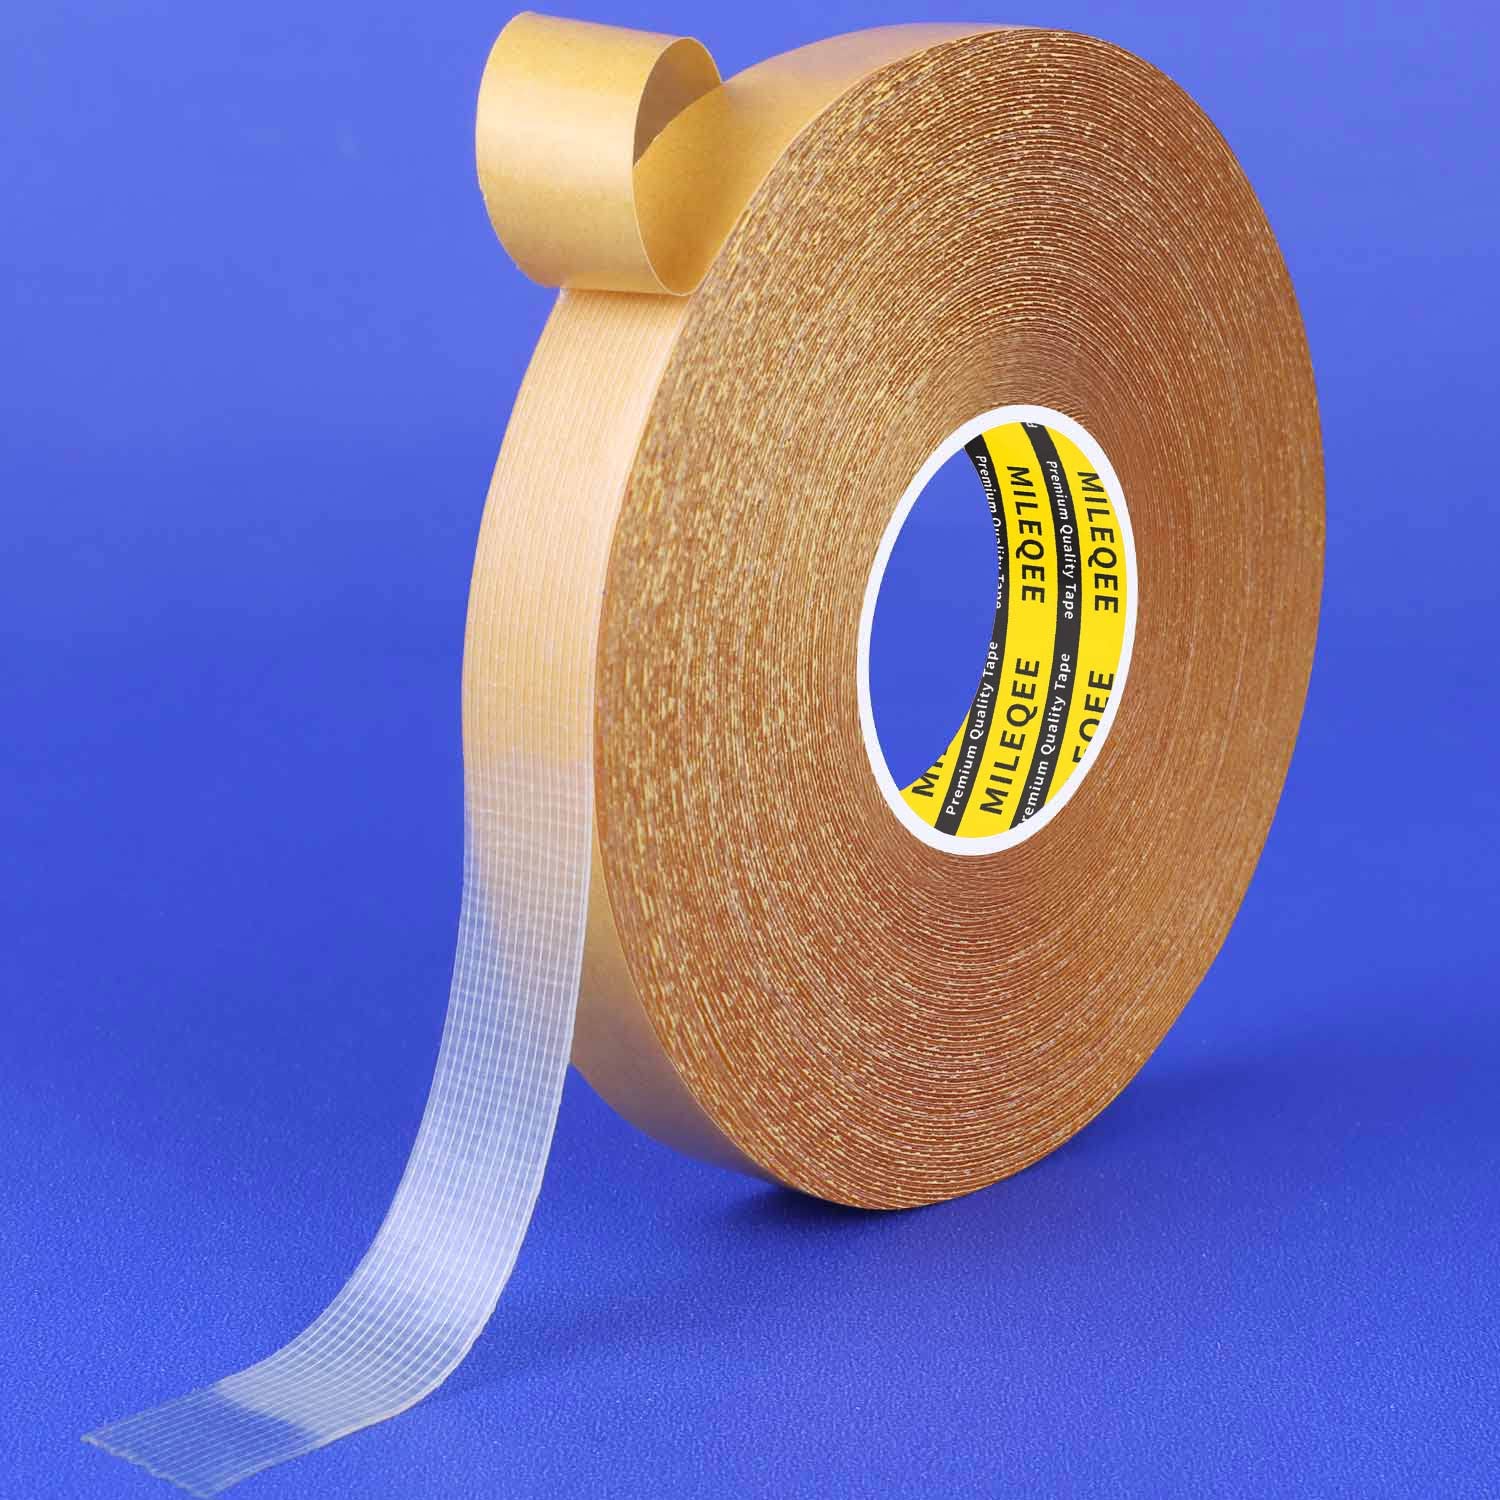 MILEQEE Double Sided Tape Heavy Duty Universal High Tack Strong Wall  Adhesive with Fiberglass Mesh Super Sticky Resistente Clear Tape Easy Use  Mounting Tape (0.59 x 66FT)